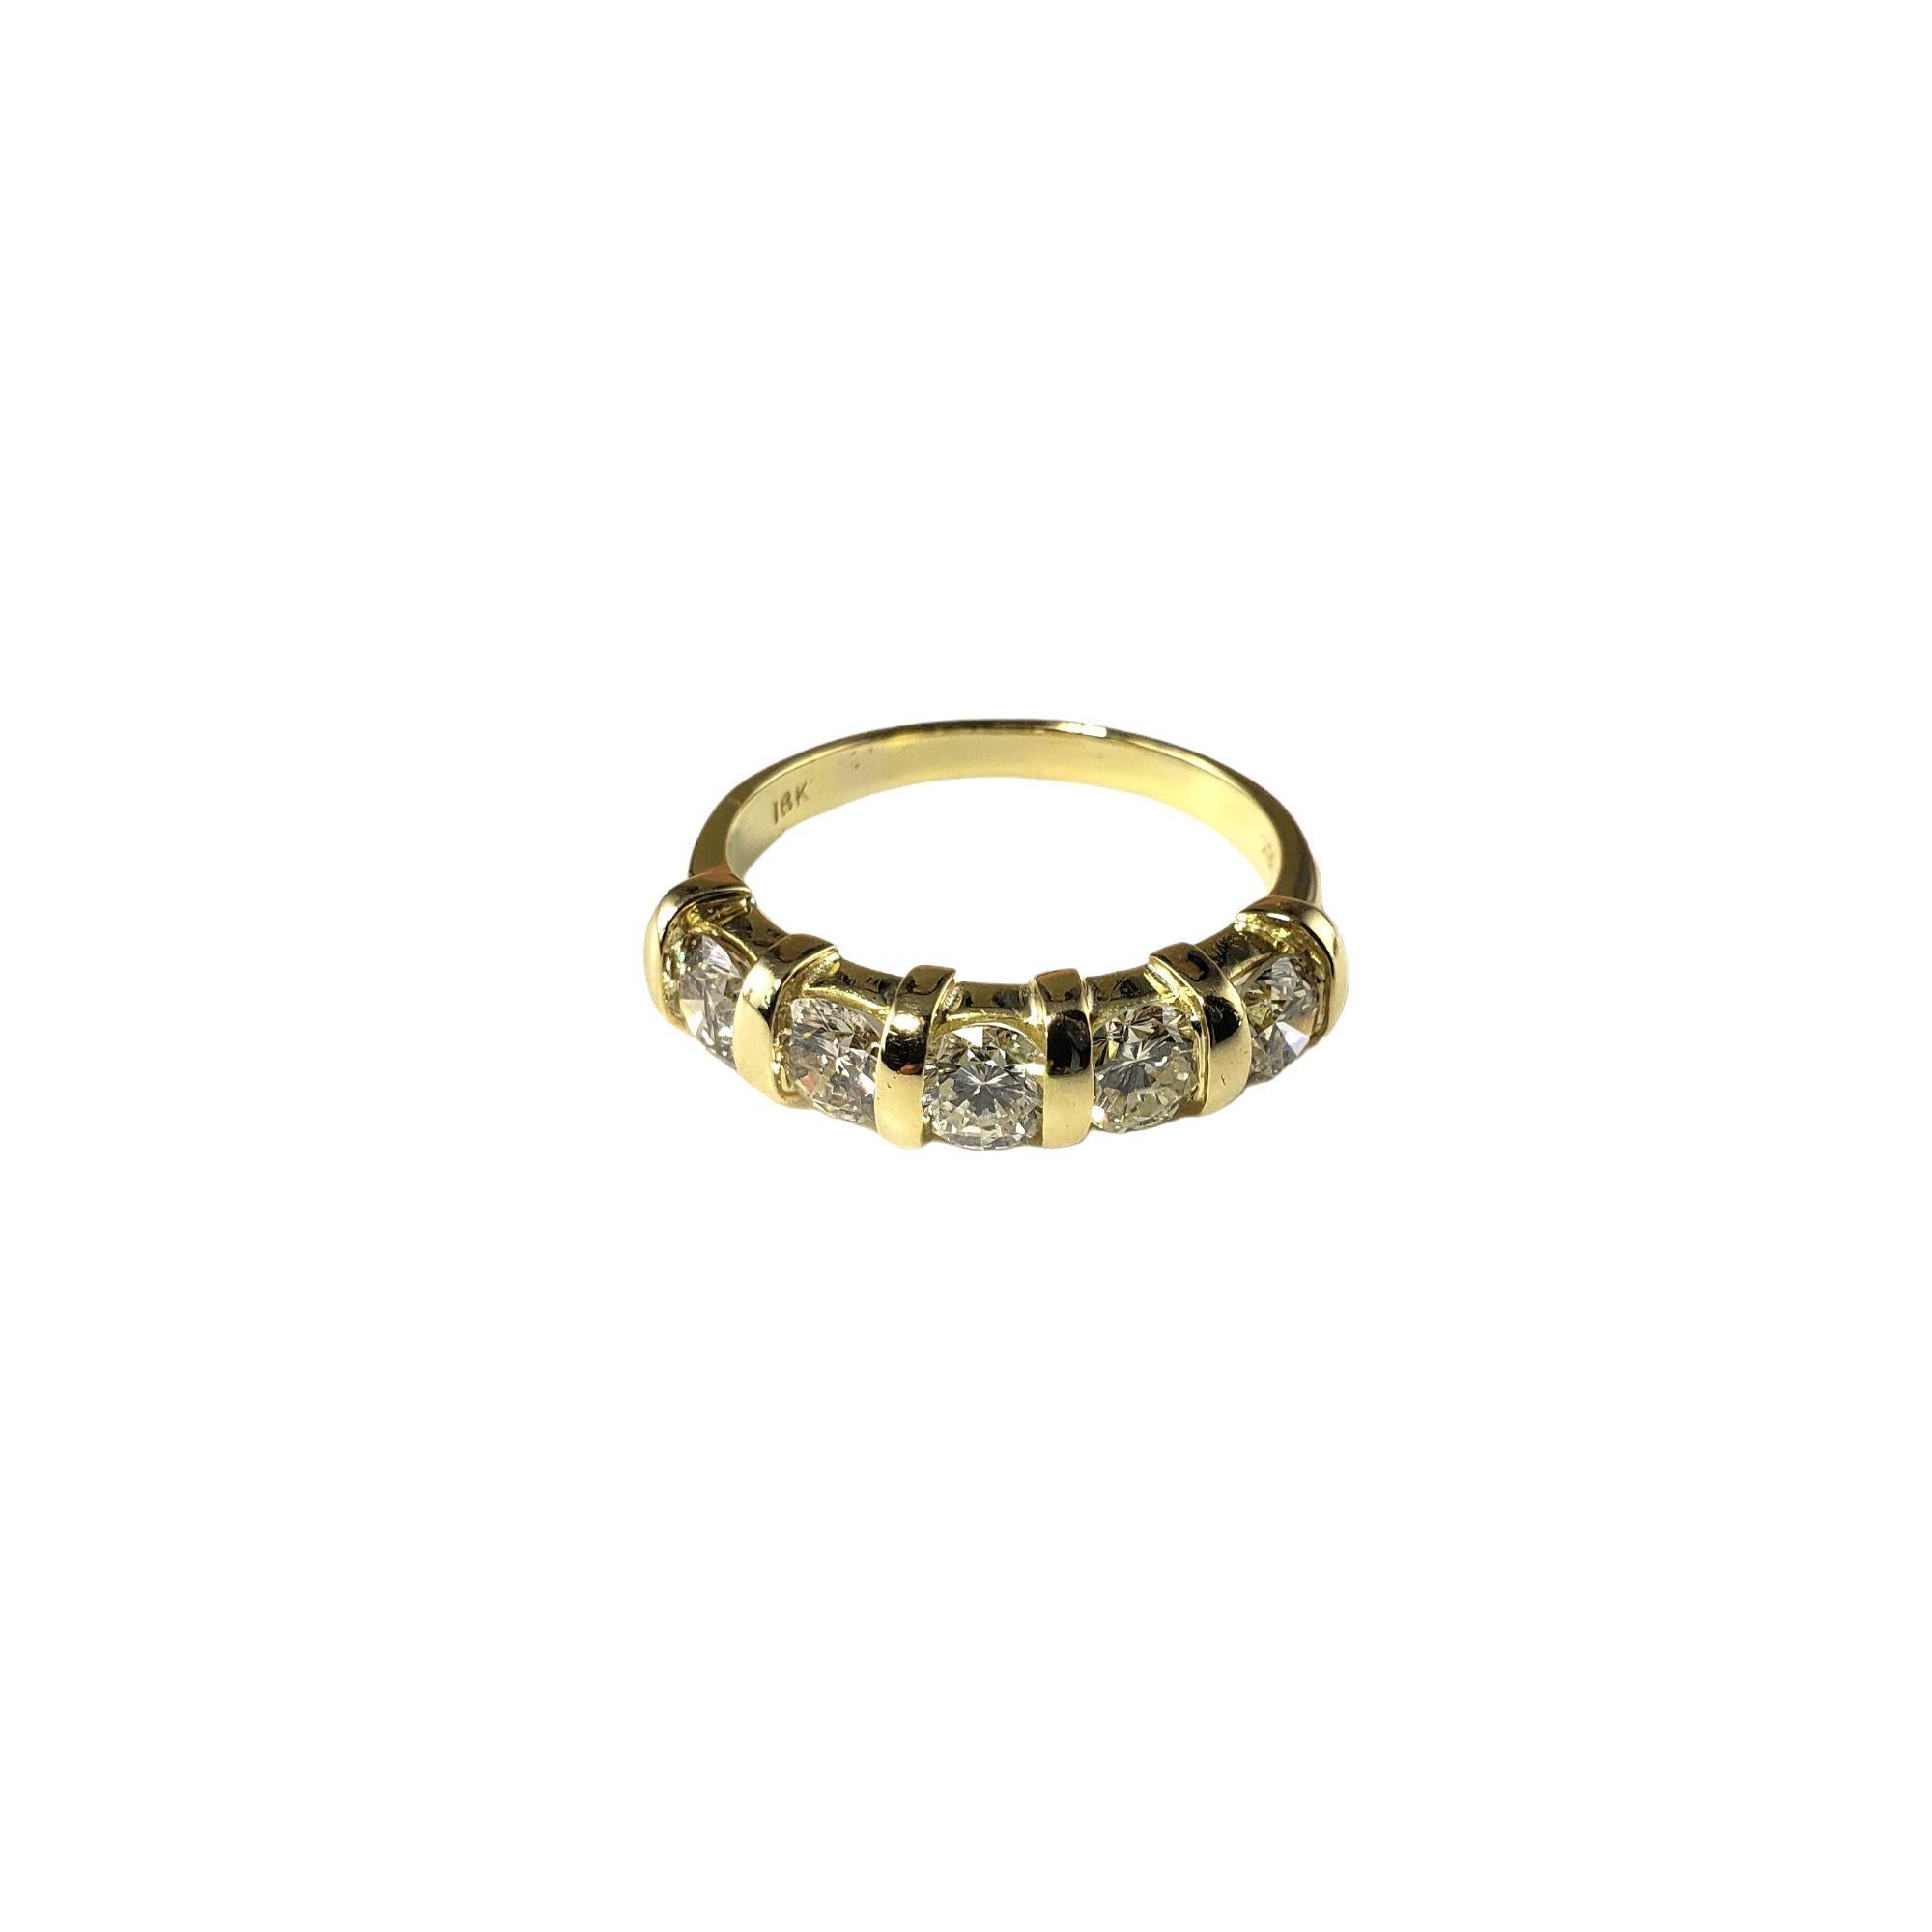 Vintage 18 Karat Yellow Gold and Diamond Wedding Band Ring Size 9.25-

This sparkling band features five round brilliant cut diamonds set in beautifully detailed 18K yellow gold.  Width:  6 mm.

Shank: 2.5 mm.

Approximate total diamond weight:  